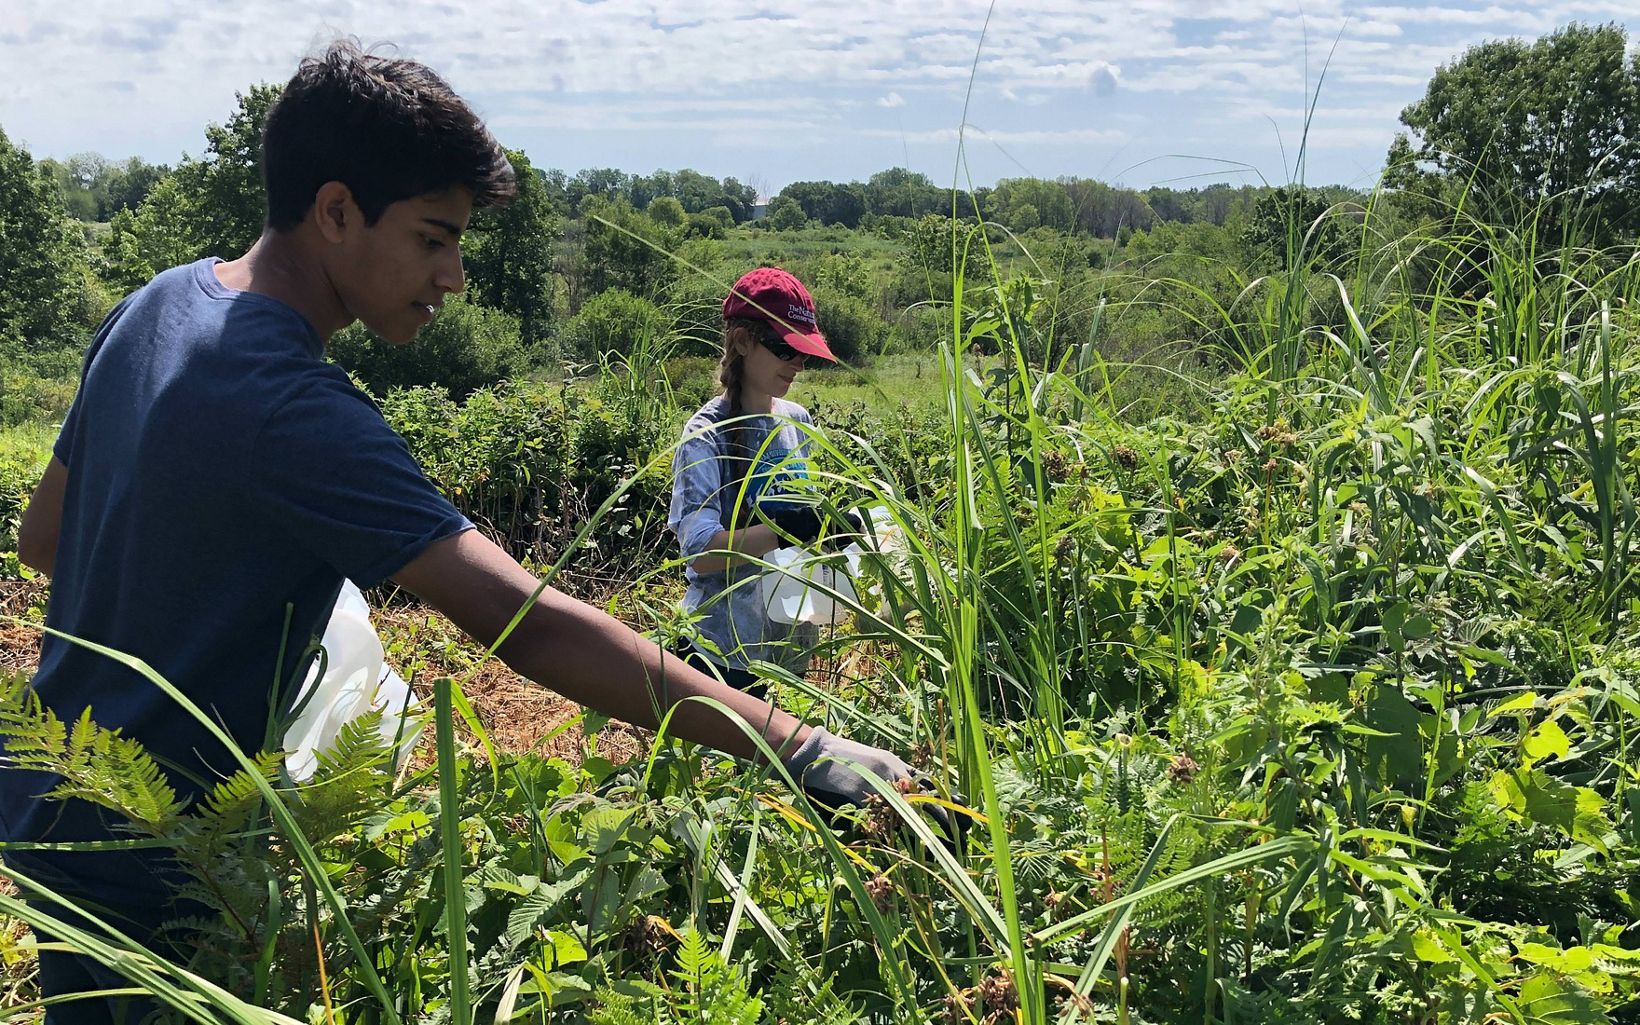 High schoolers collect seed from native wildflowers in a lush prairie.